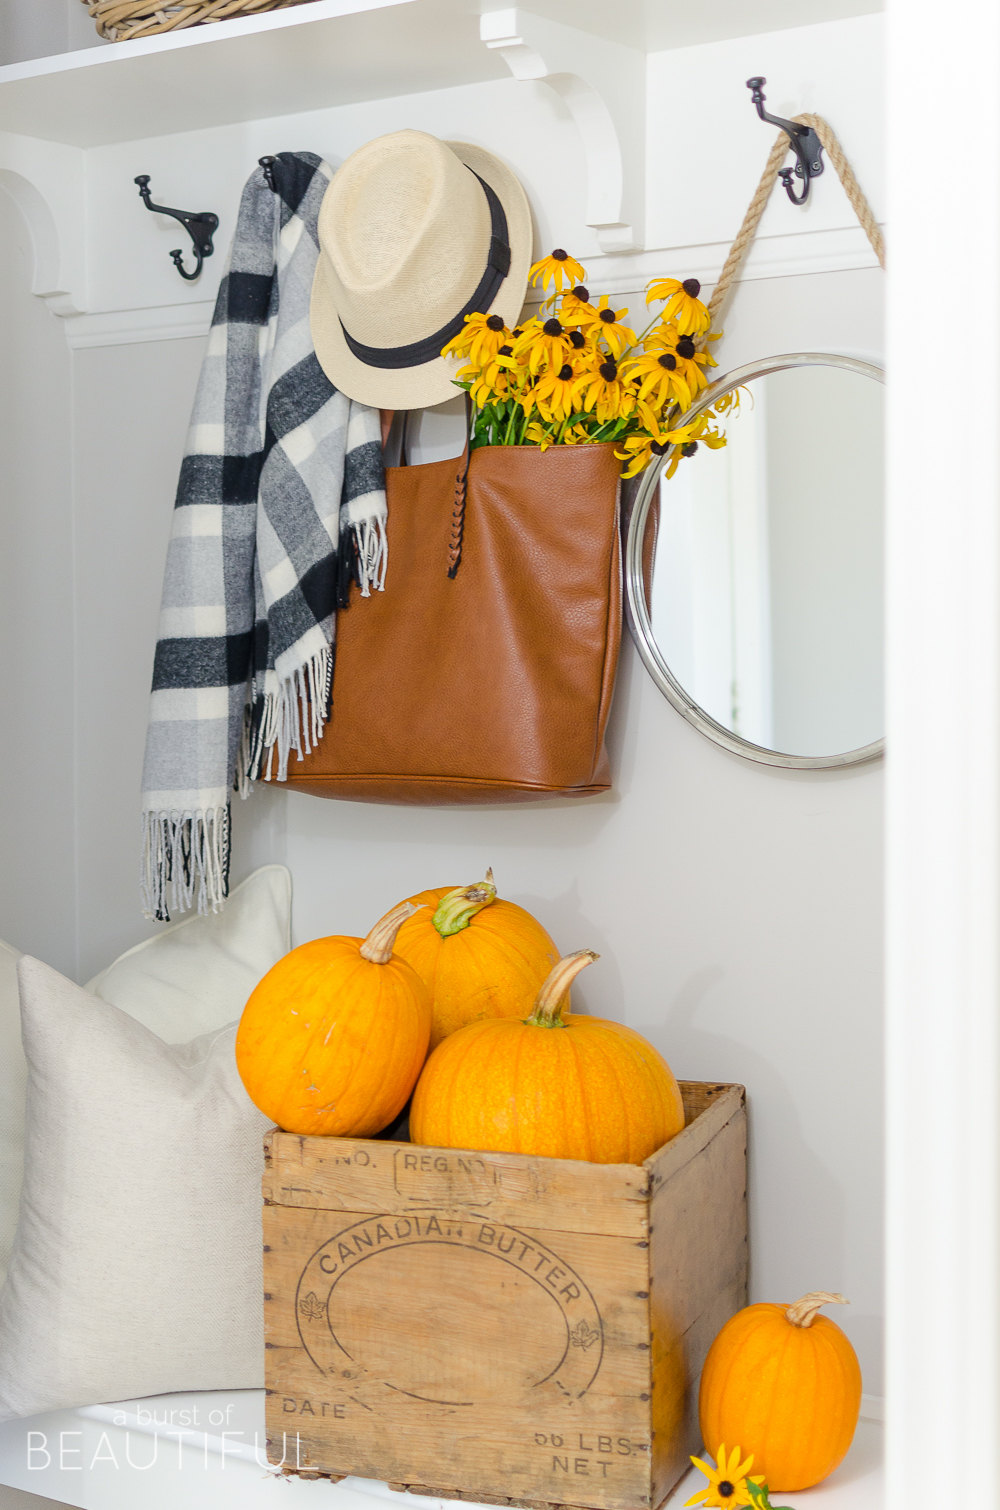 A simple farmhouse decorated with subtle touches of fall